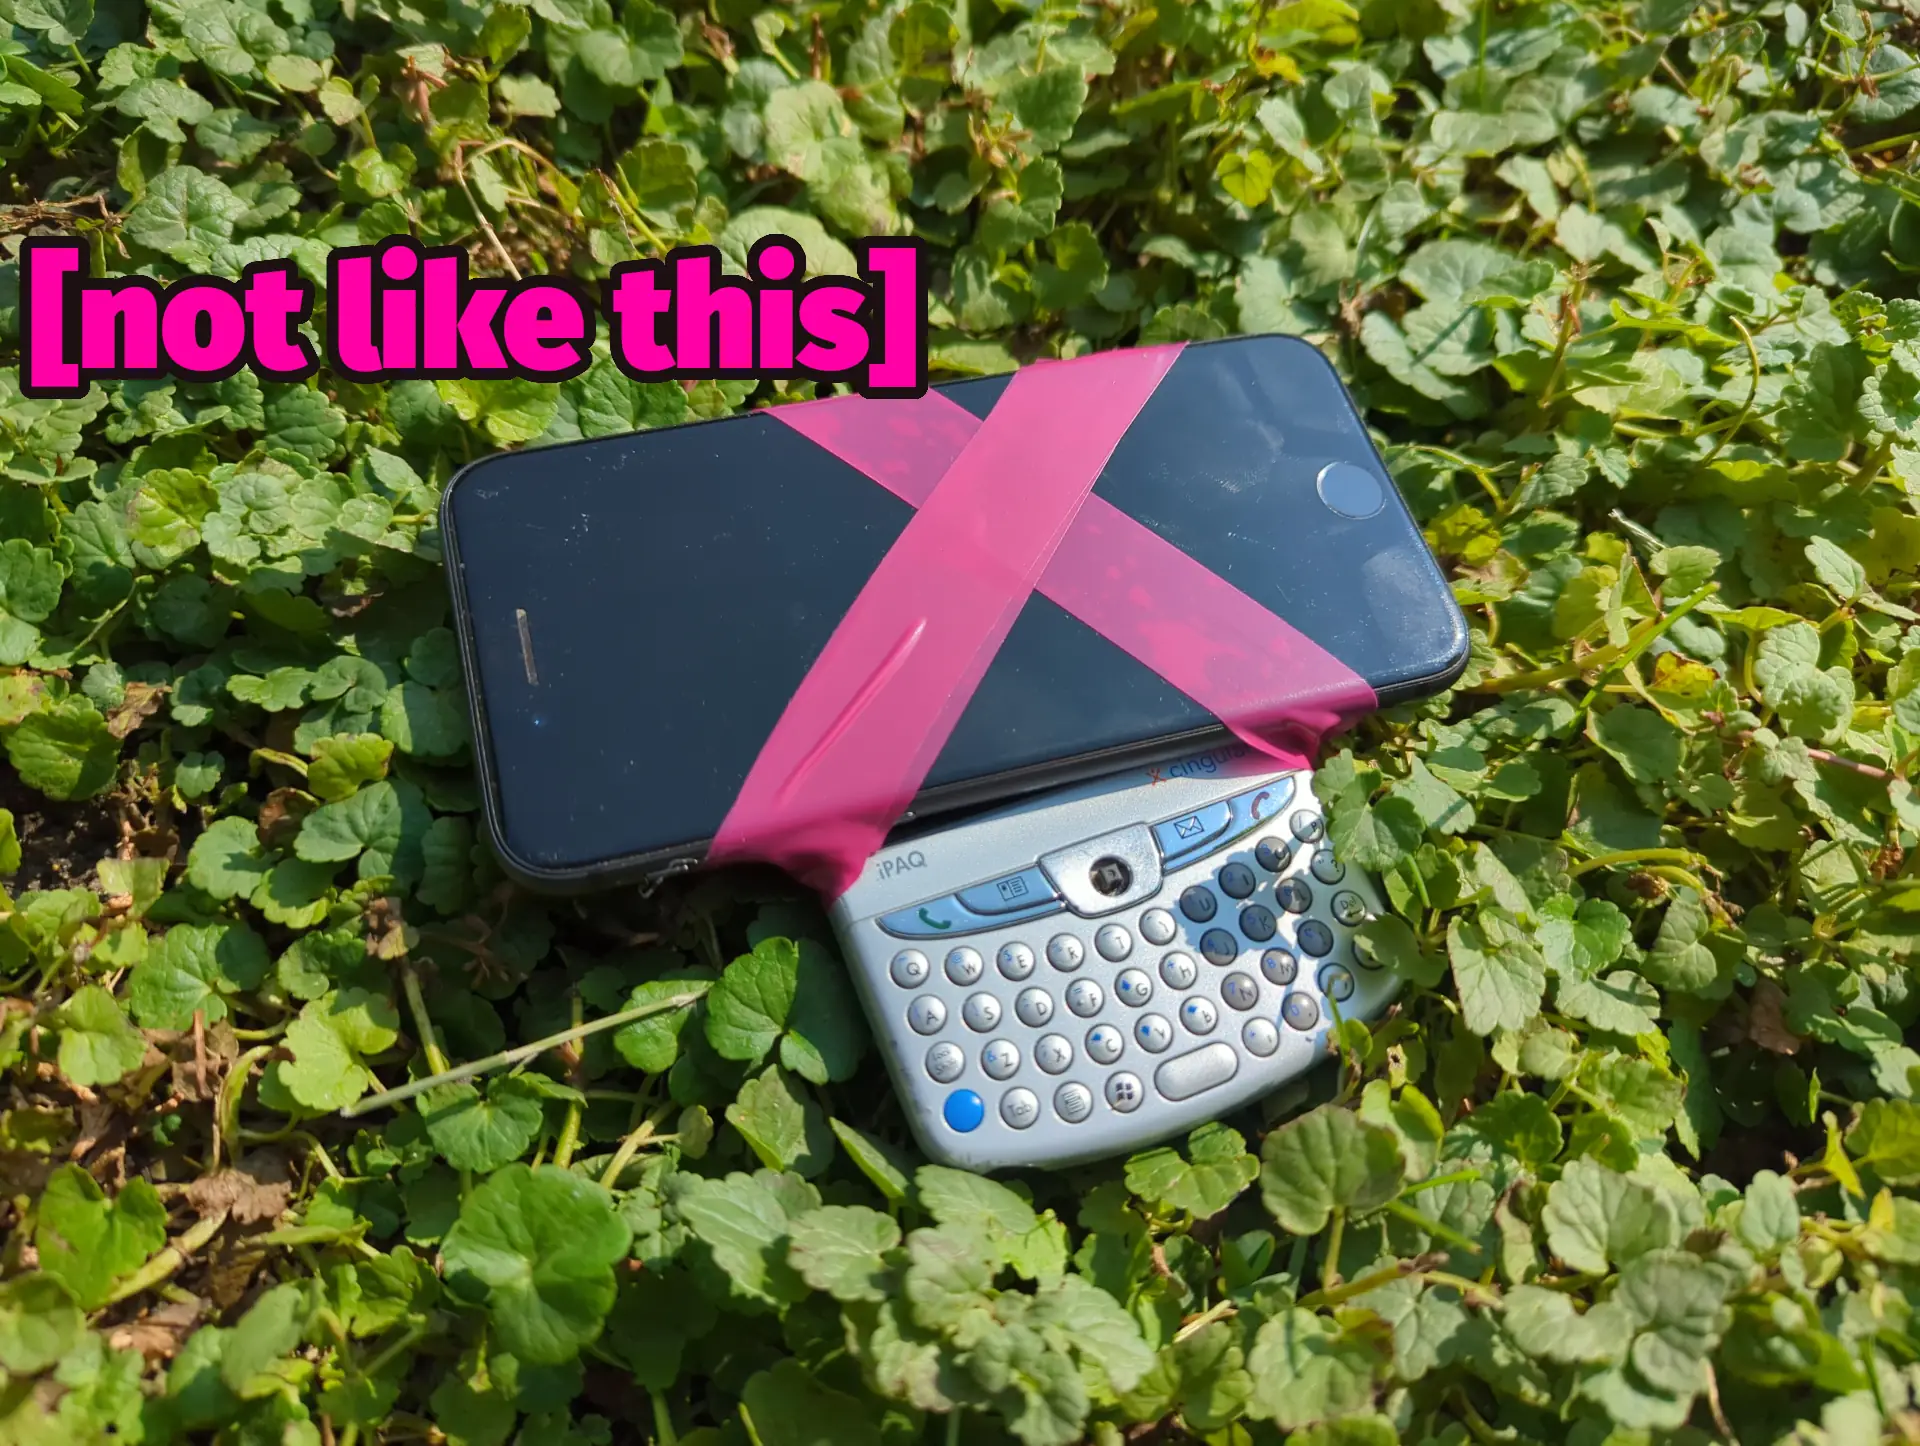 It's a smartphone taped to an older BlackBerry-style phone. The phones are sitting in a field of clover and superimposed are the words "[not like this]".